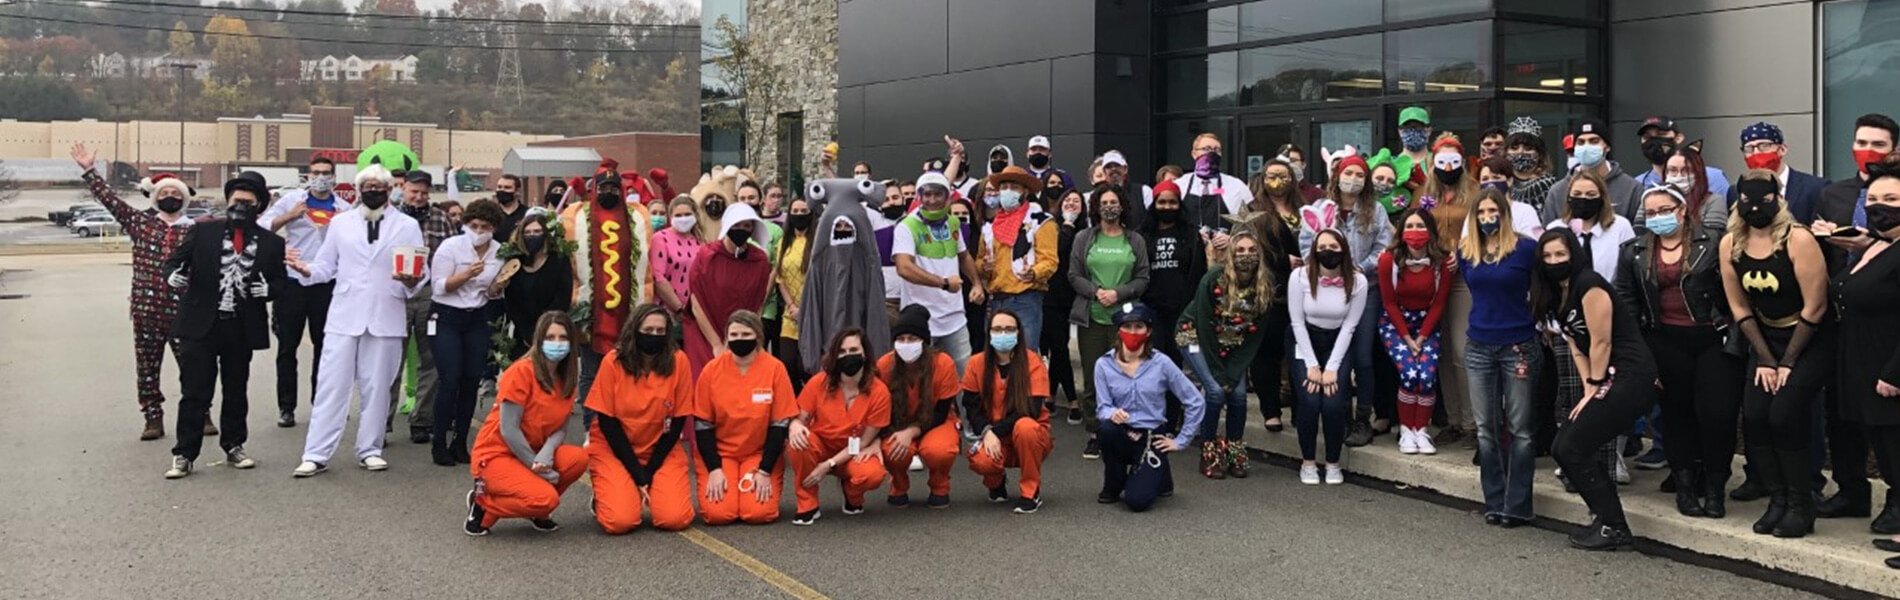 DNA employees posing for picture with Halloween costumes